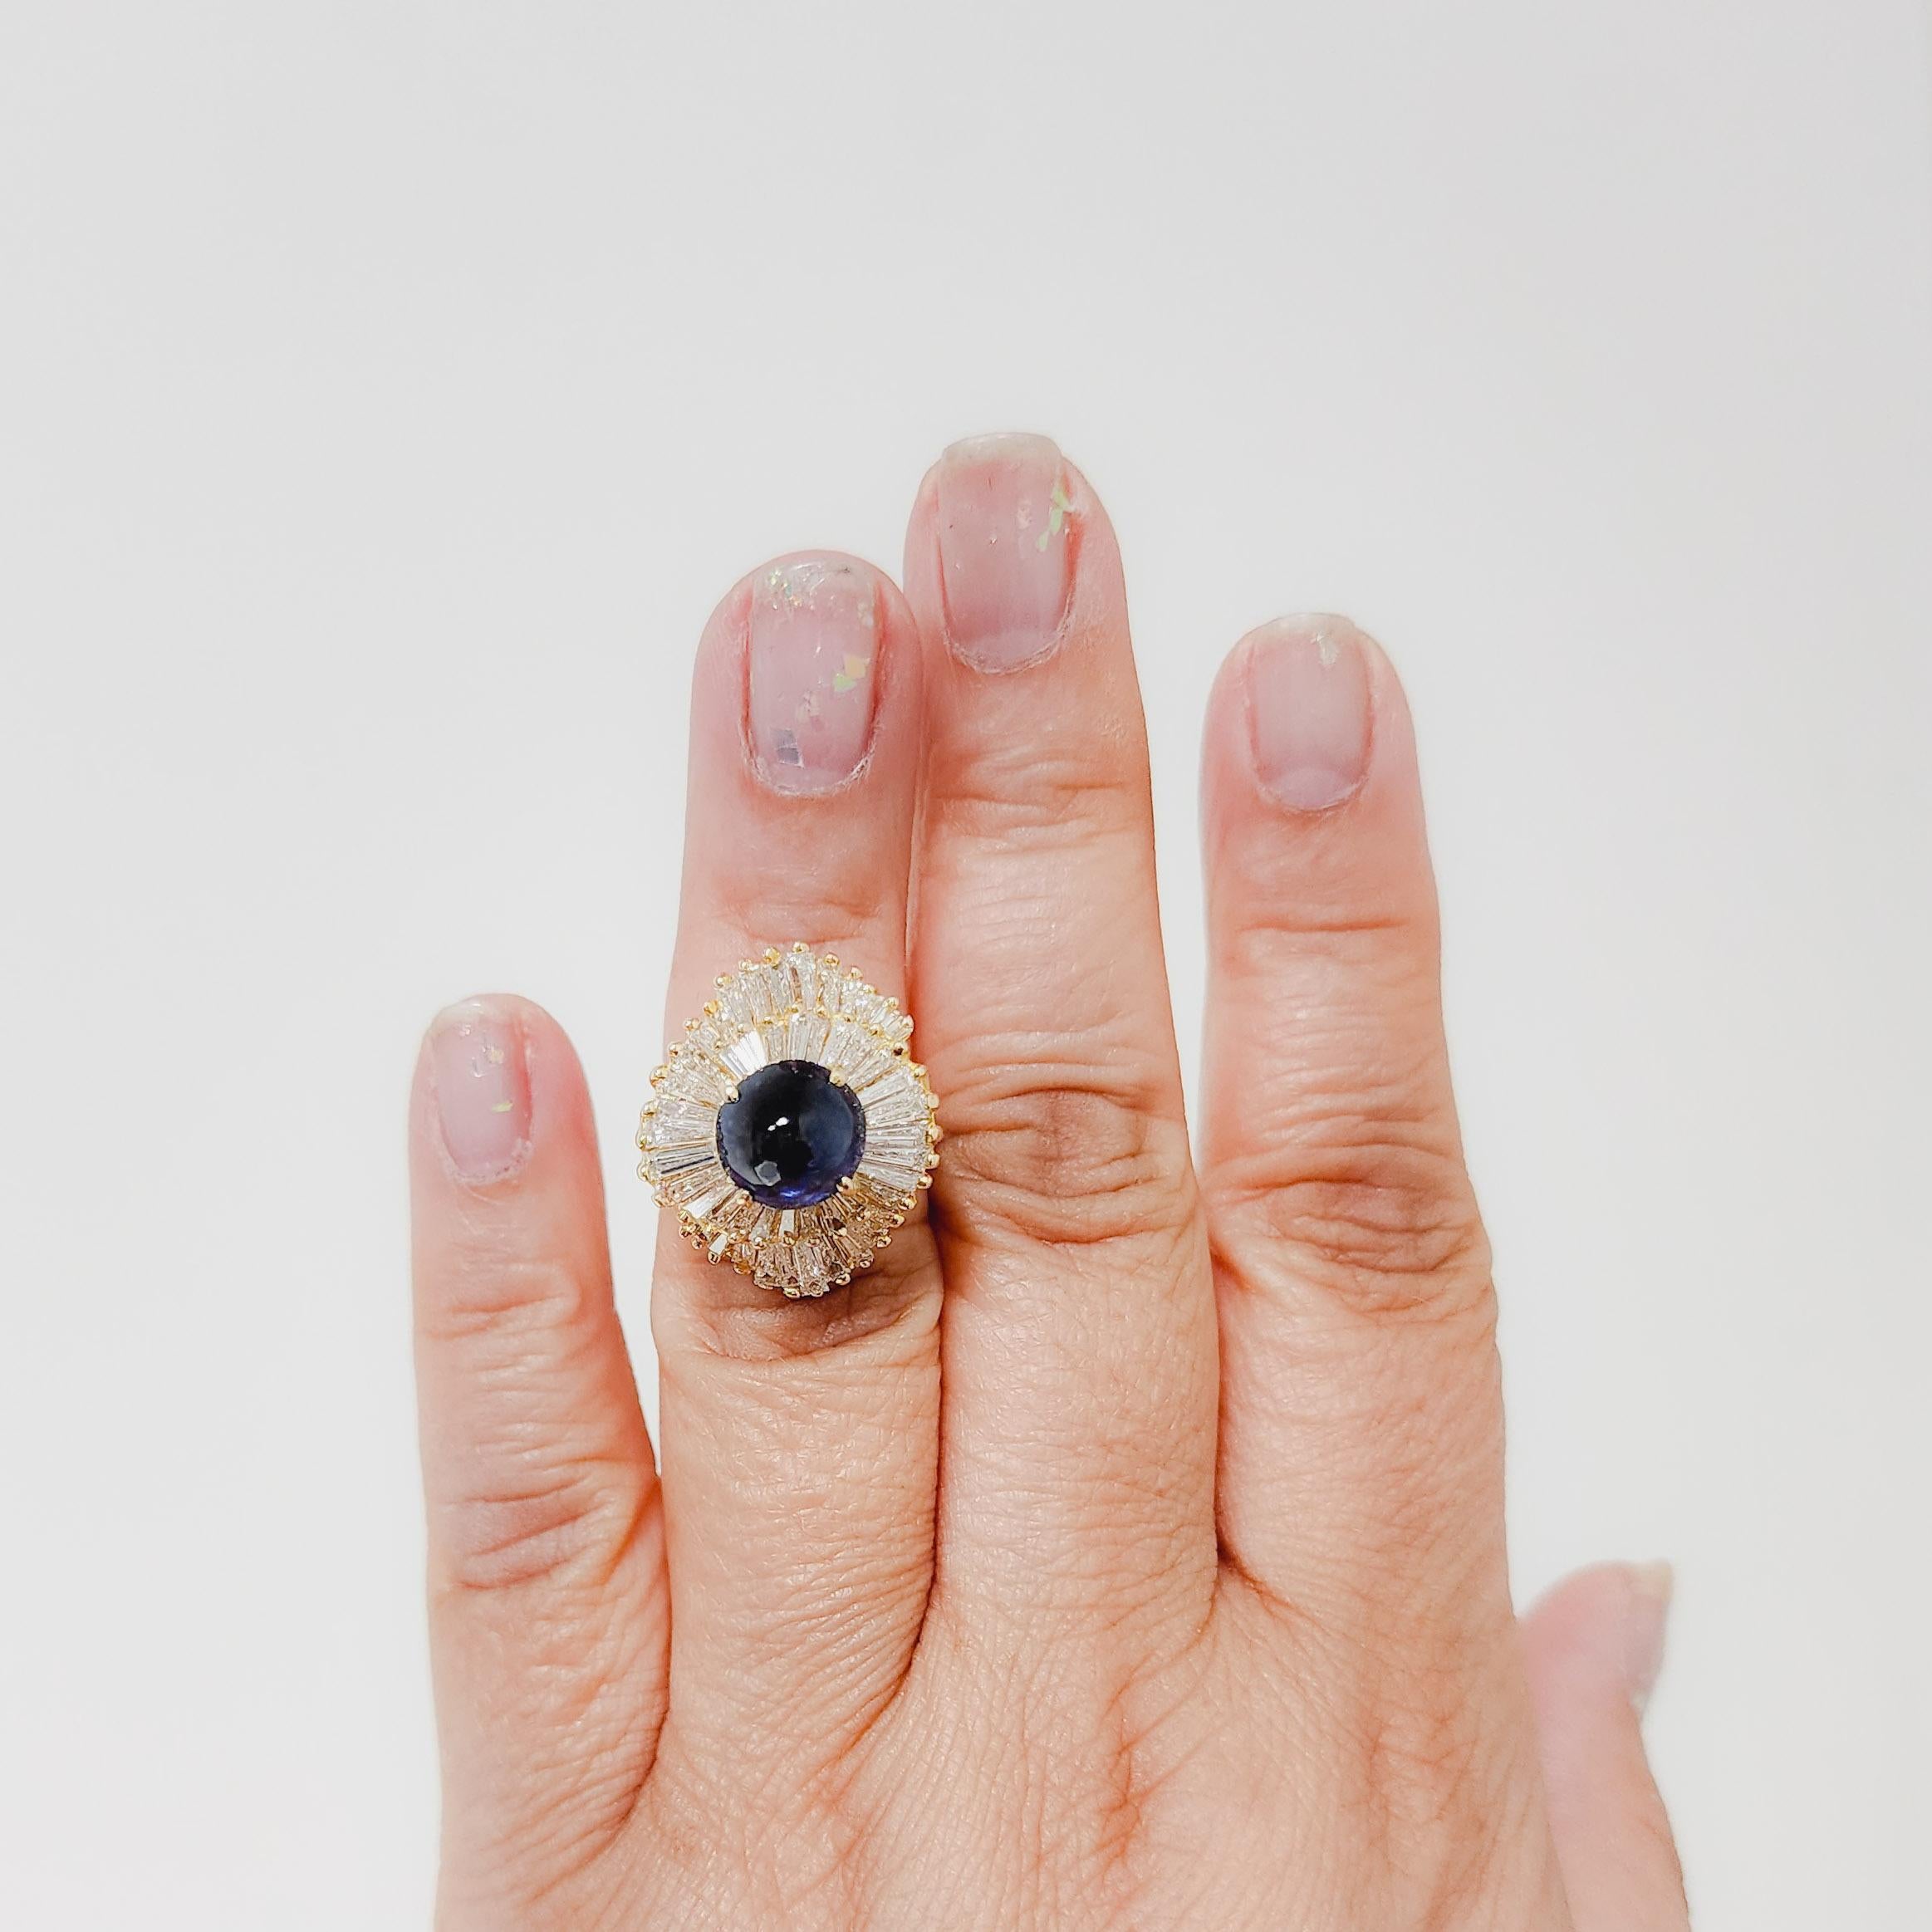 Gorgeous big blue sapphire cabochon with good quality white diamond baguettes.  Handmade in 18k yellow gold.  Ring size 5.5.